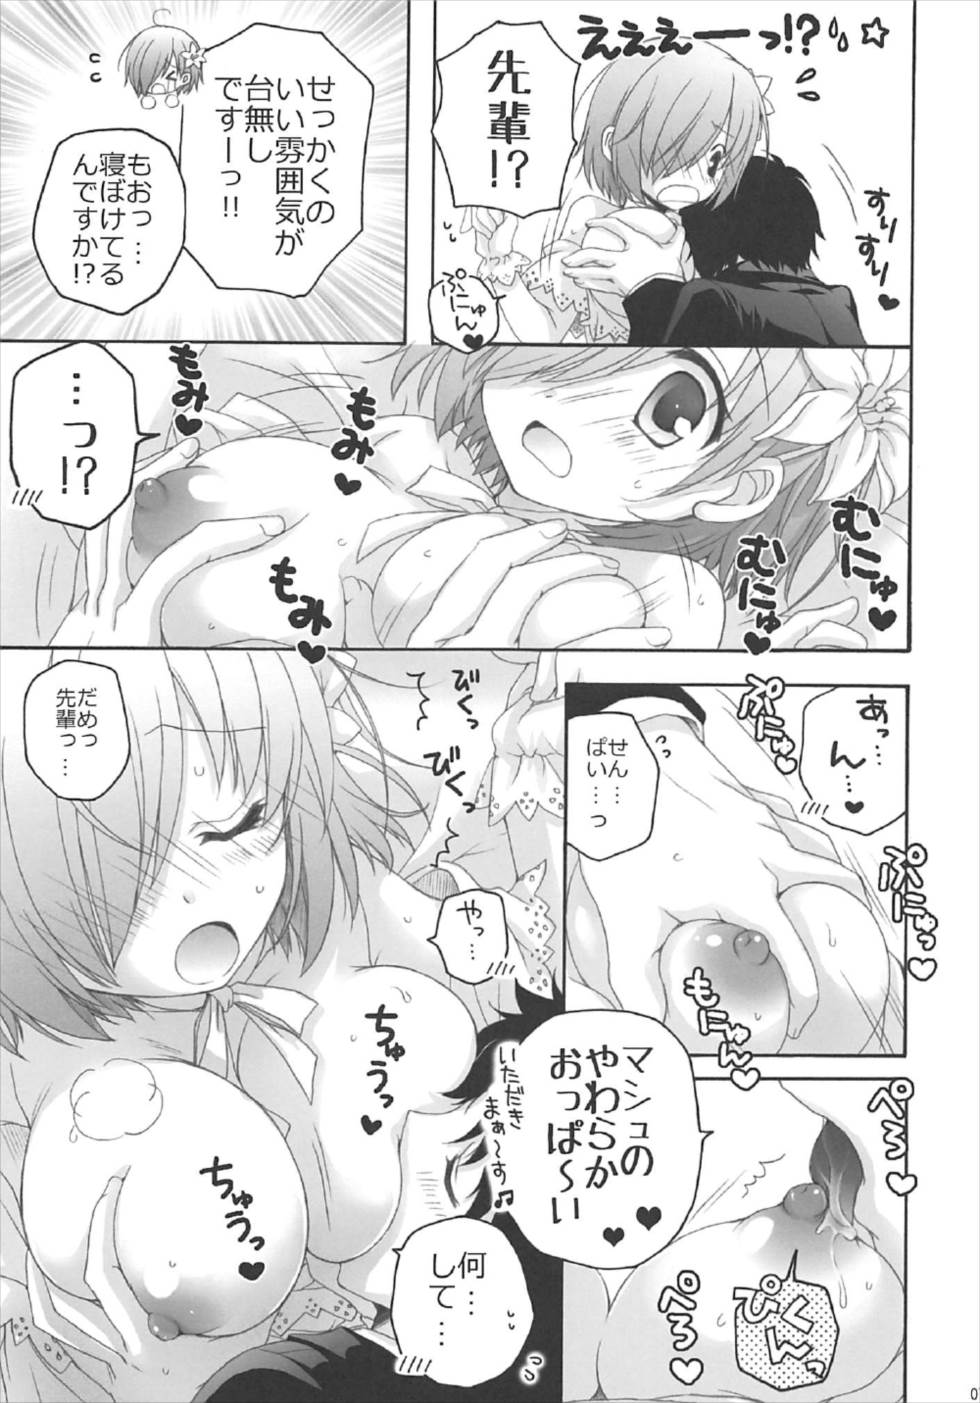 (C92) [Pyonpyororin (Akoko.)] After Party no Sono Ato de (Fate/Grand Order) (C92) [ぴょんぴょろりん (あここ。)] After Partyのそのあとで (Fate/Grand Order)